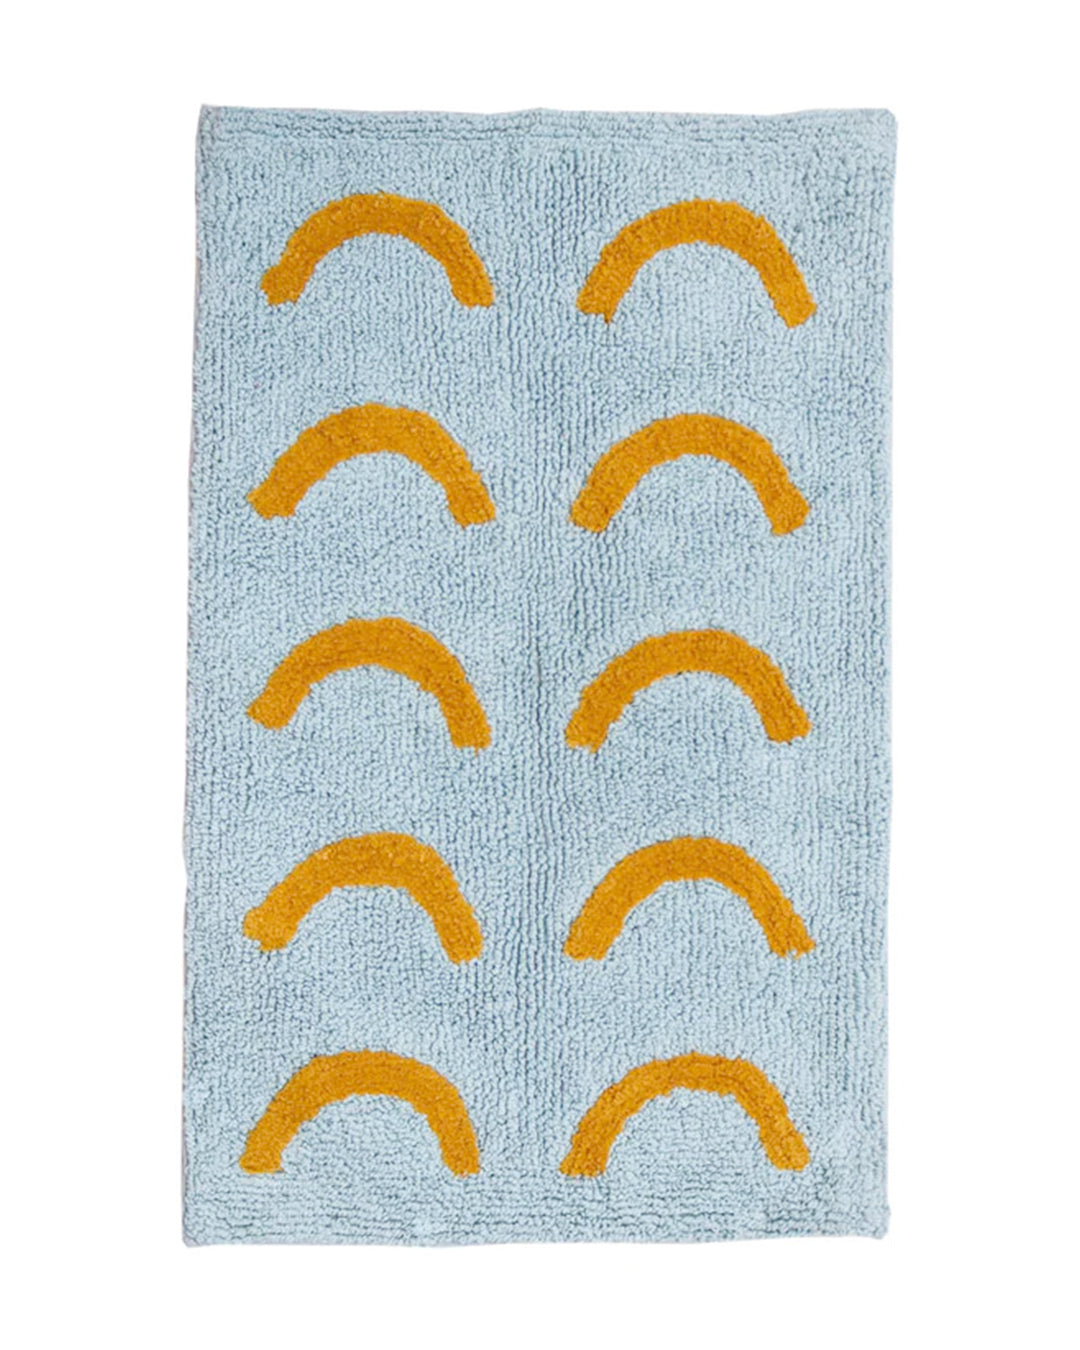 Add some colour to your kids bathroom with the Blue Curve Bath Mat. This geometric design in sky blue and burnt orange is a perfect addition to add a sense of fun to any childrens' bathroom. High on absorbency and practicality, these bath mats are made from plush tufted cotton that feels delightful under your toes, and feature a latex non-slip backing.